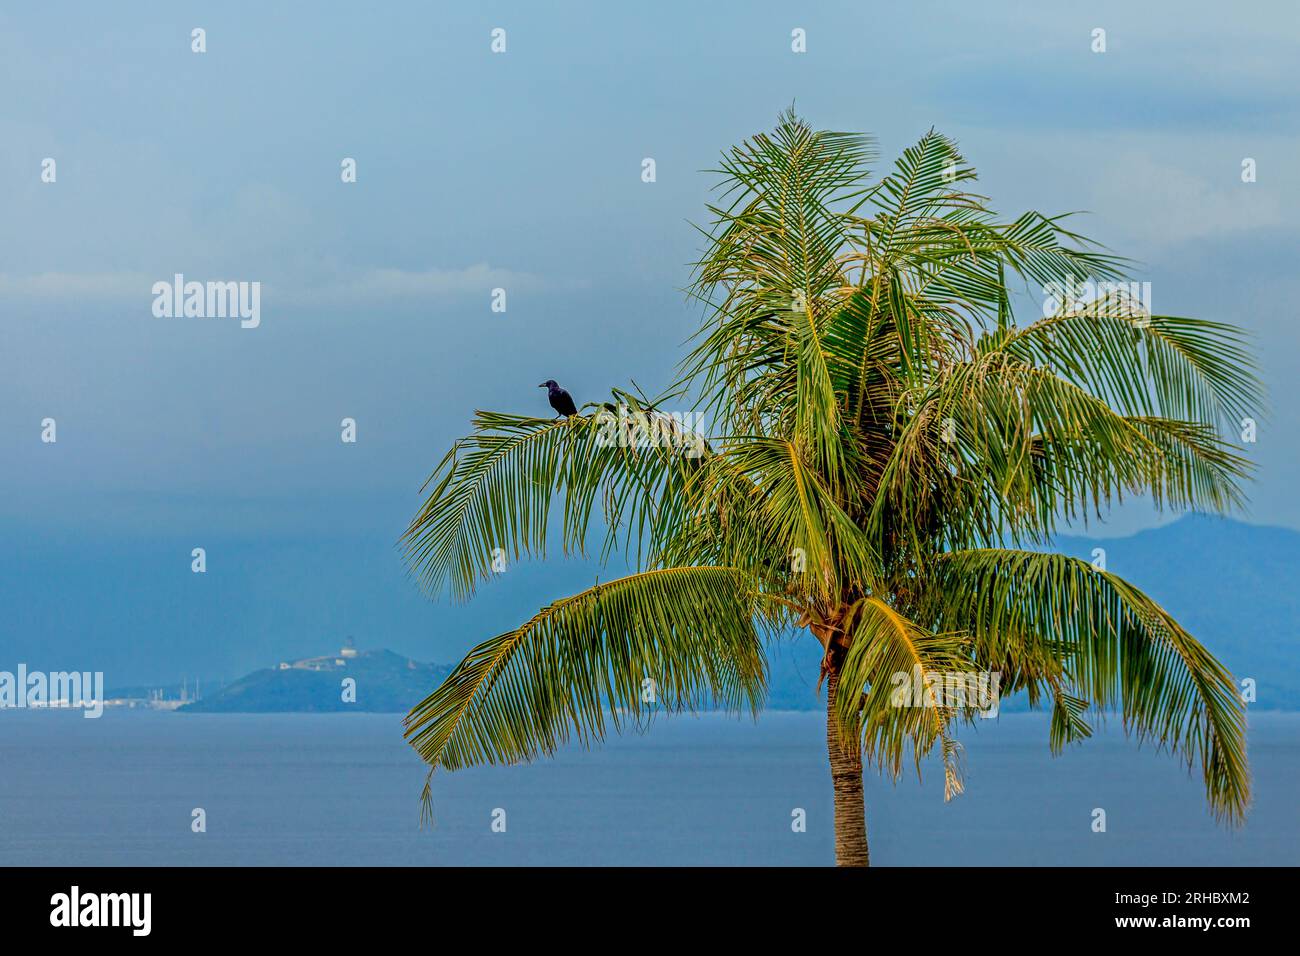 Palm tree by ocean, Batangas, Calabarzon, Luzon, Philippines Stock Photo